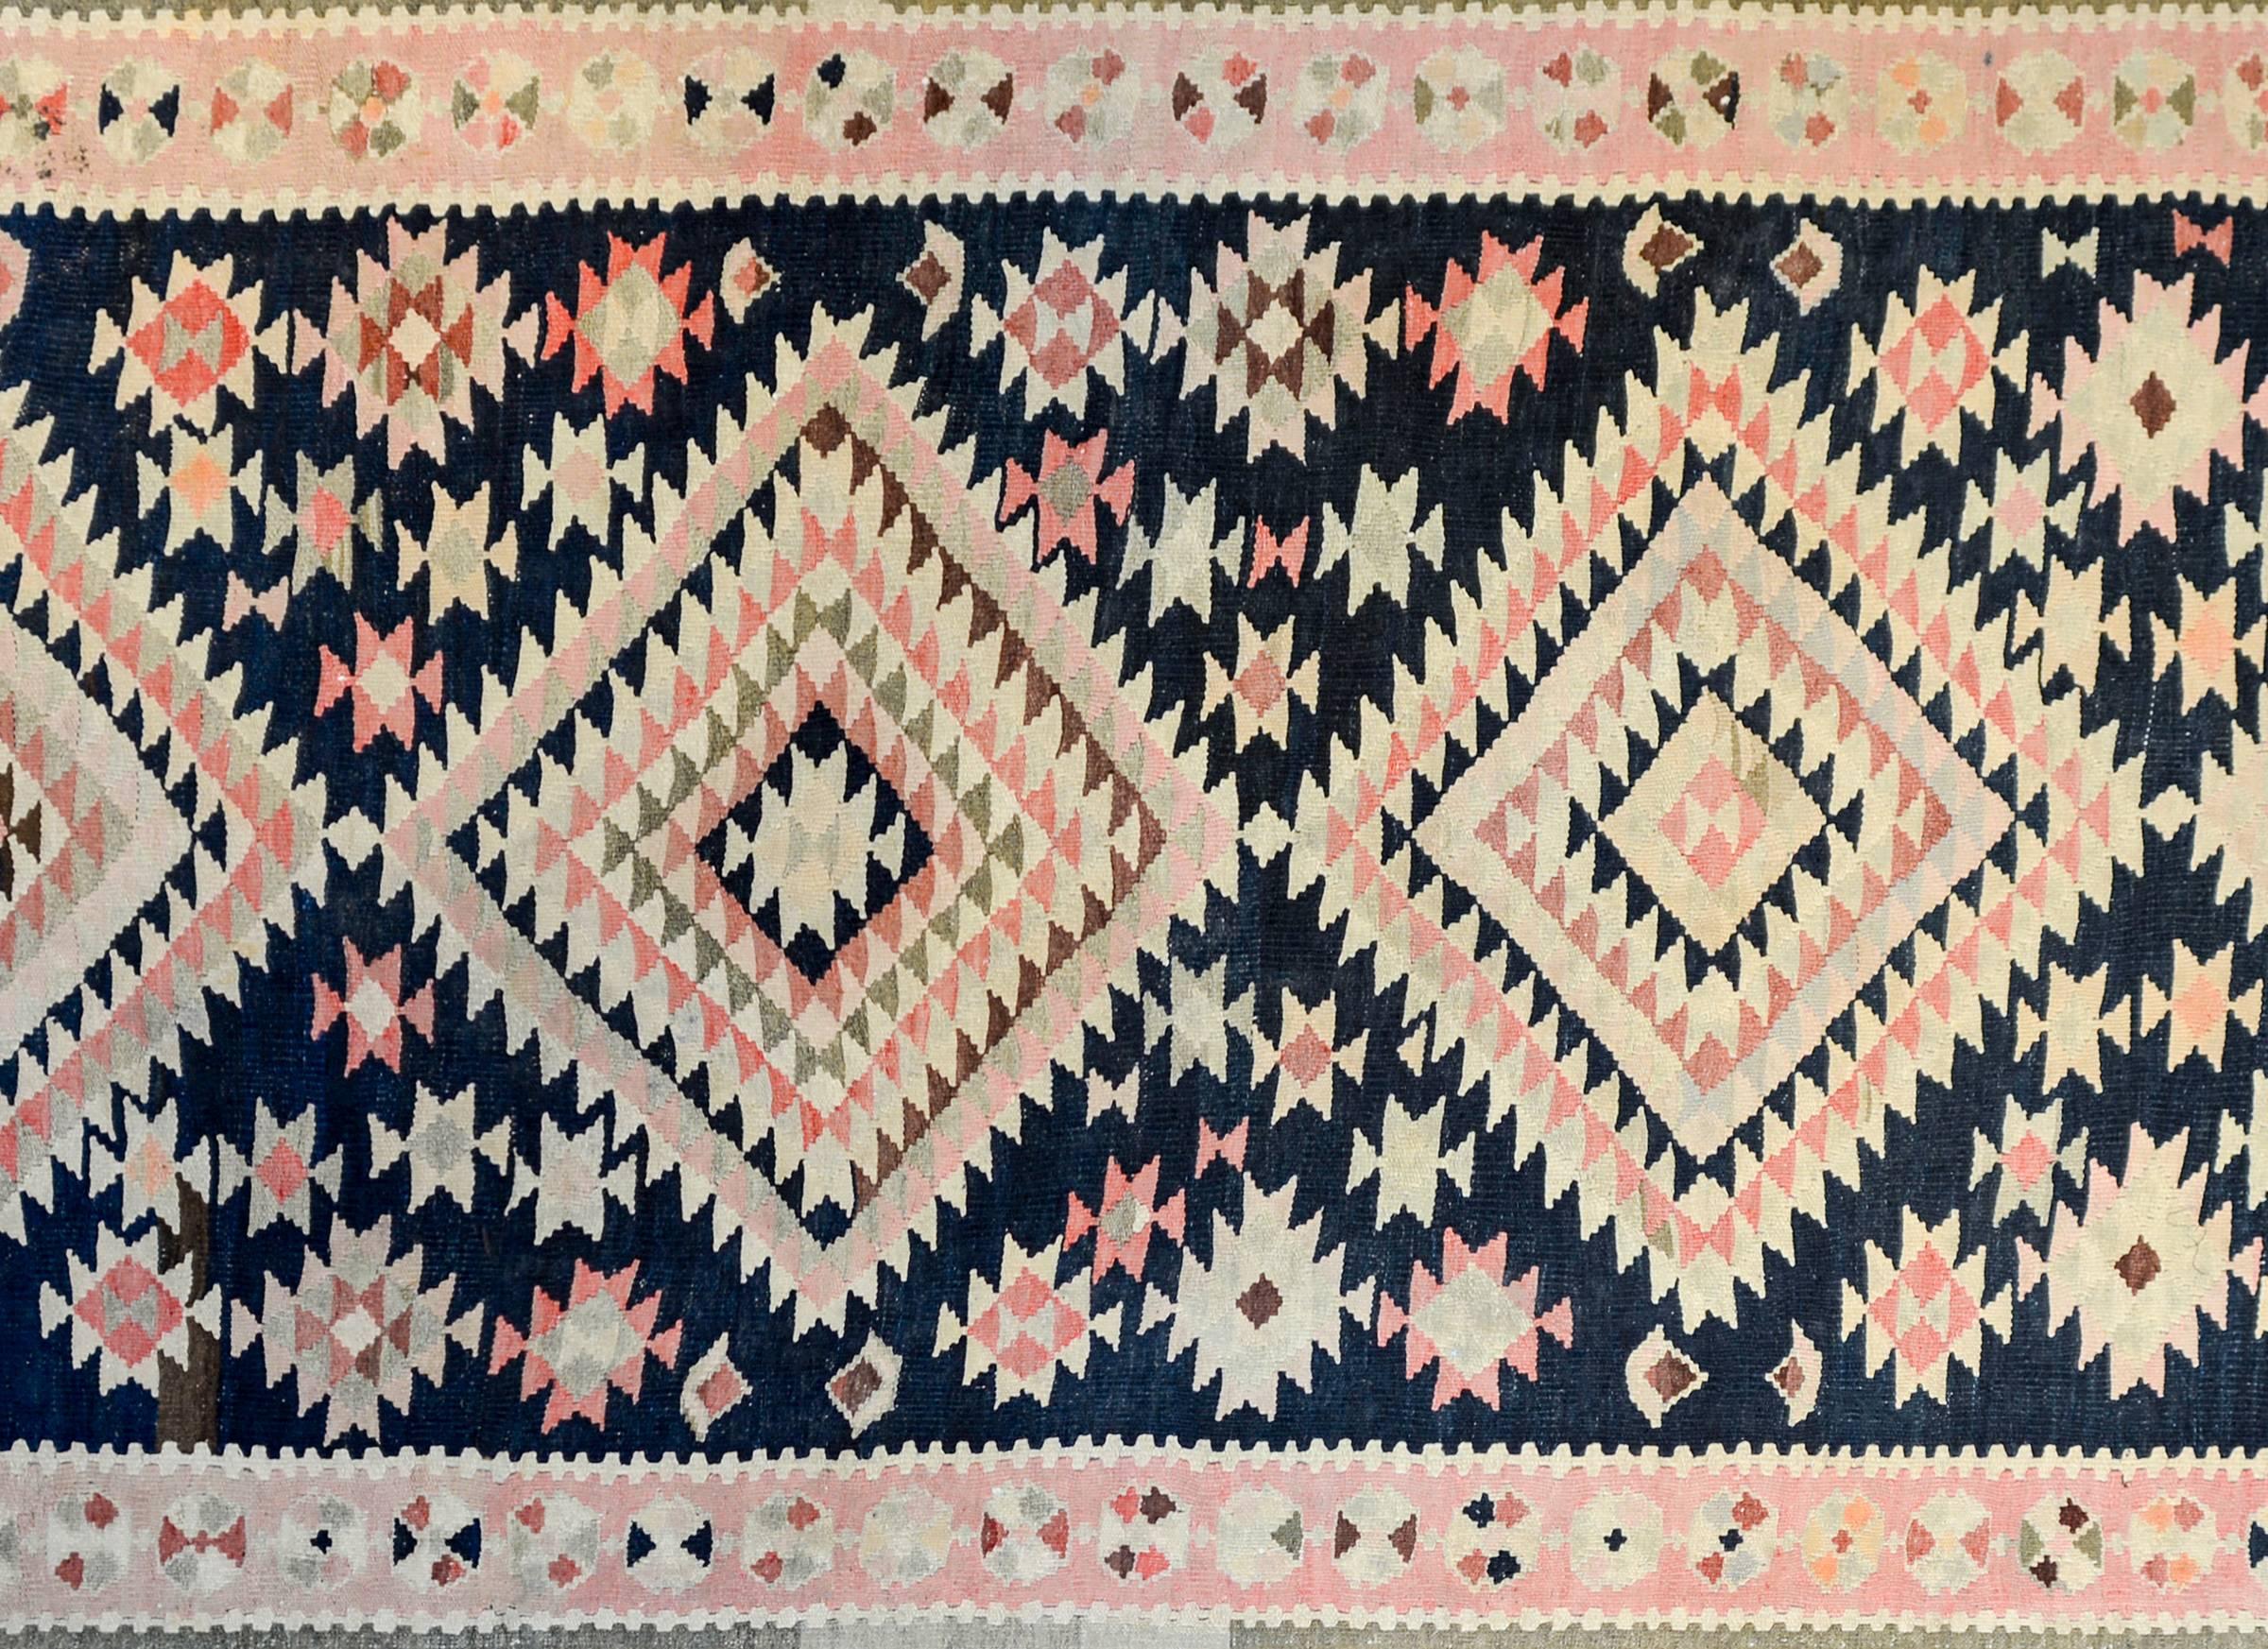 A wonderful early 20th century Persian Zarand Kilim runner with four large-scale diamond medallions amidst a field of stylized flowers on an indigo background.  The border is contrasting, with a wide central stripe with stylized flowers flanked by